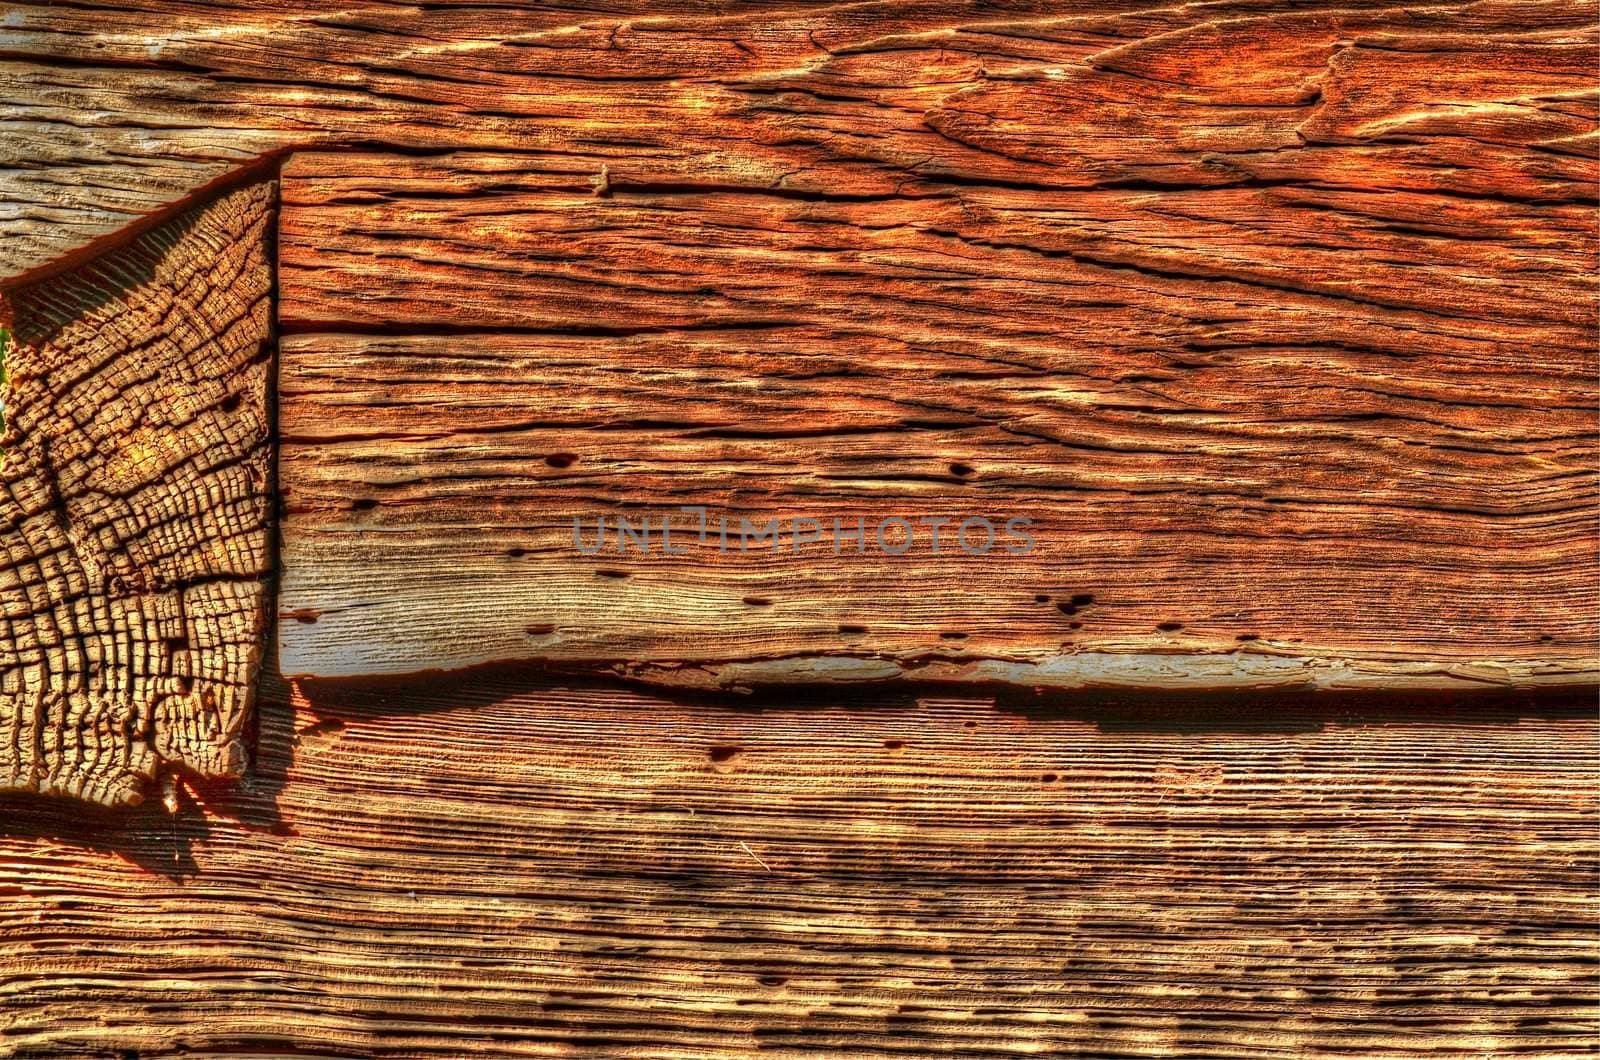 This photo present a fragment of a wooden structure of the building.